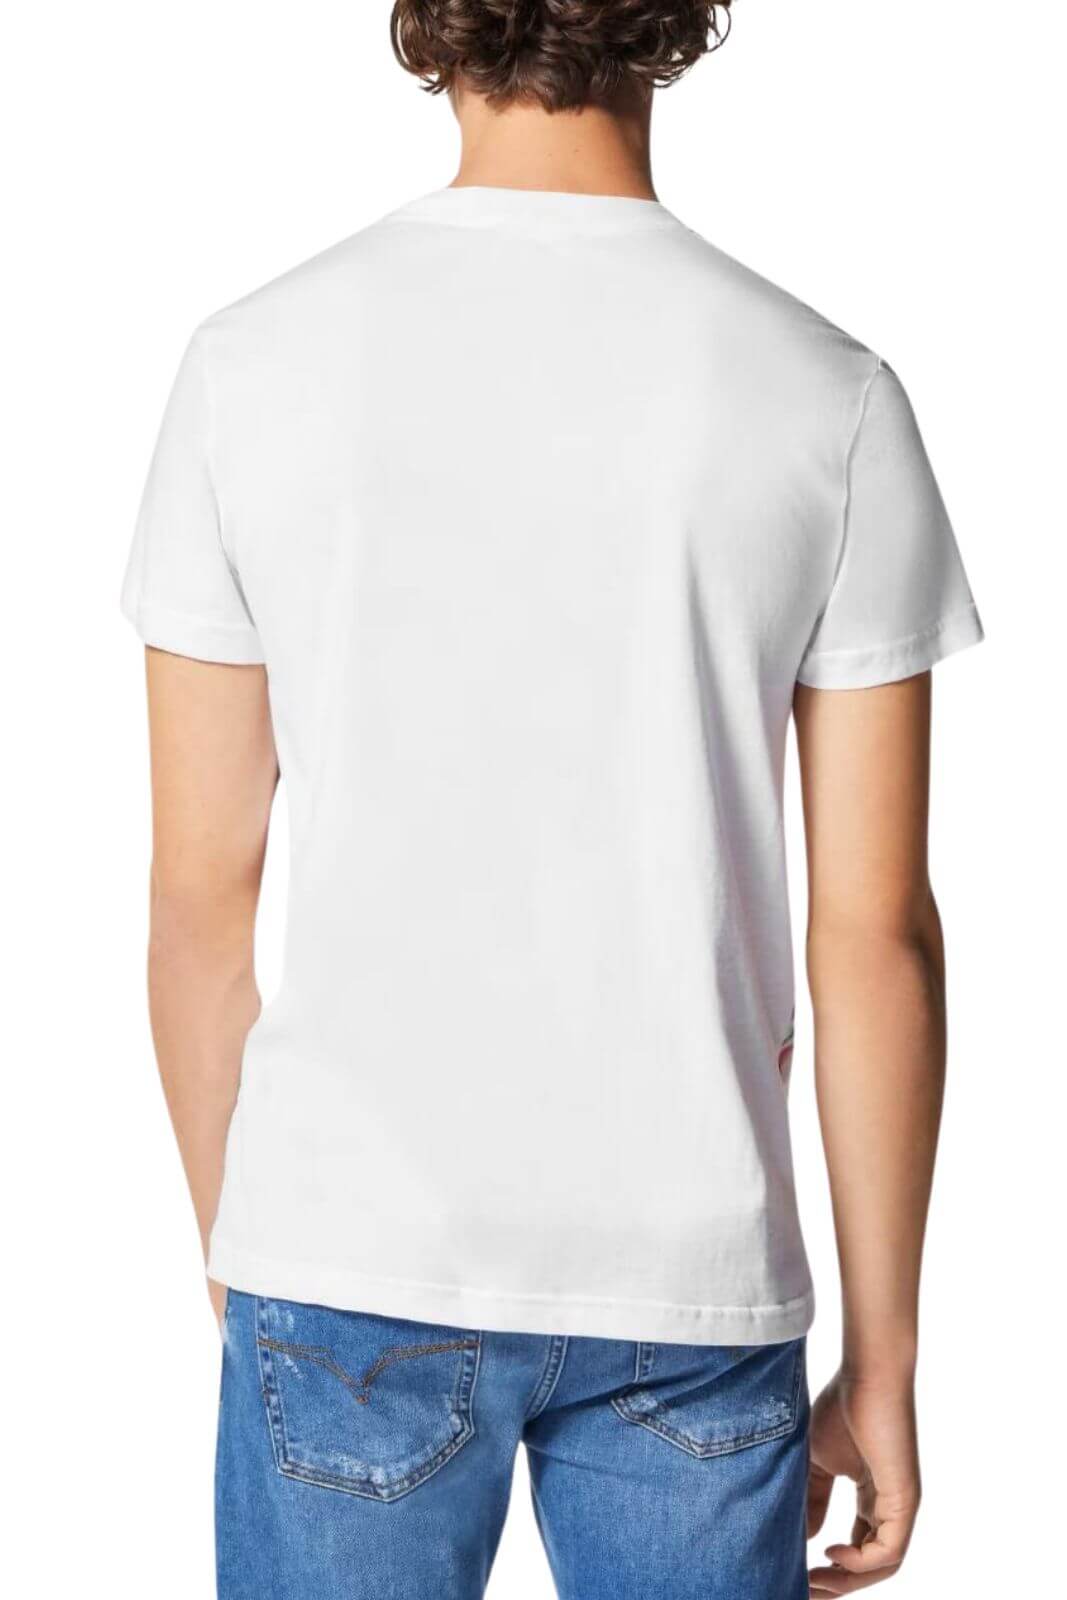 Versace Jeans Couture T-shirt Uomo PANEL GARDEN